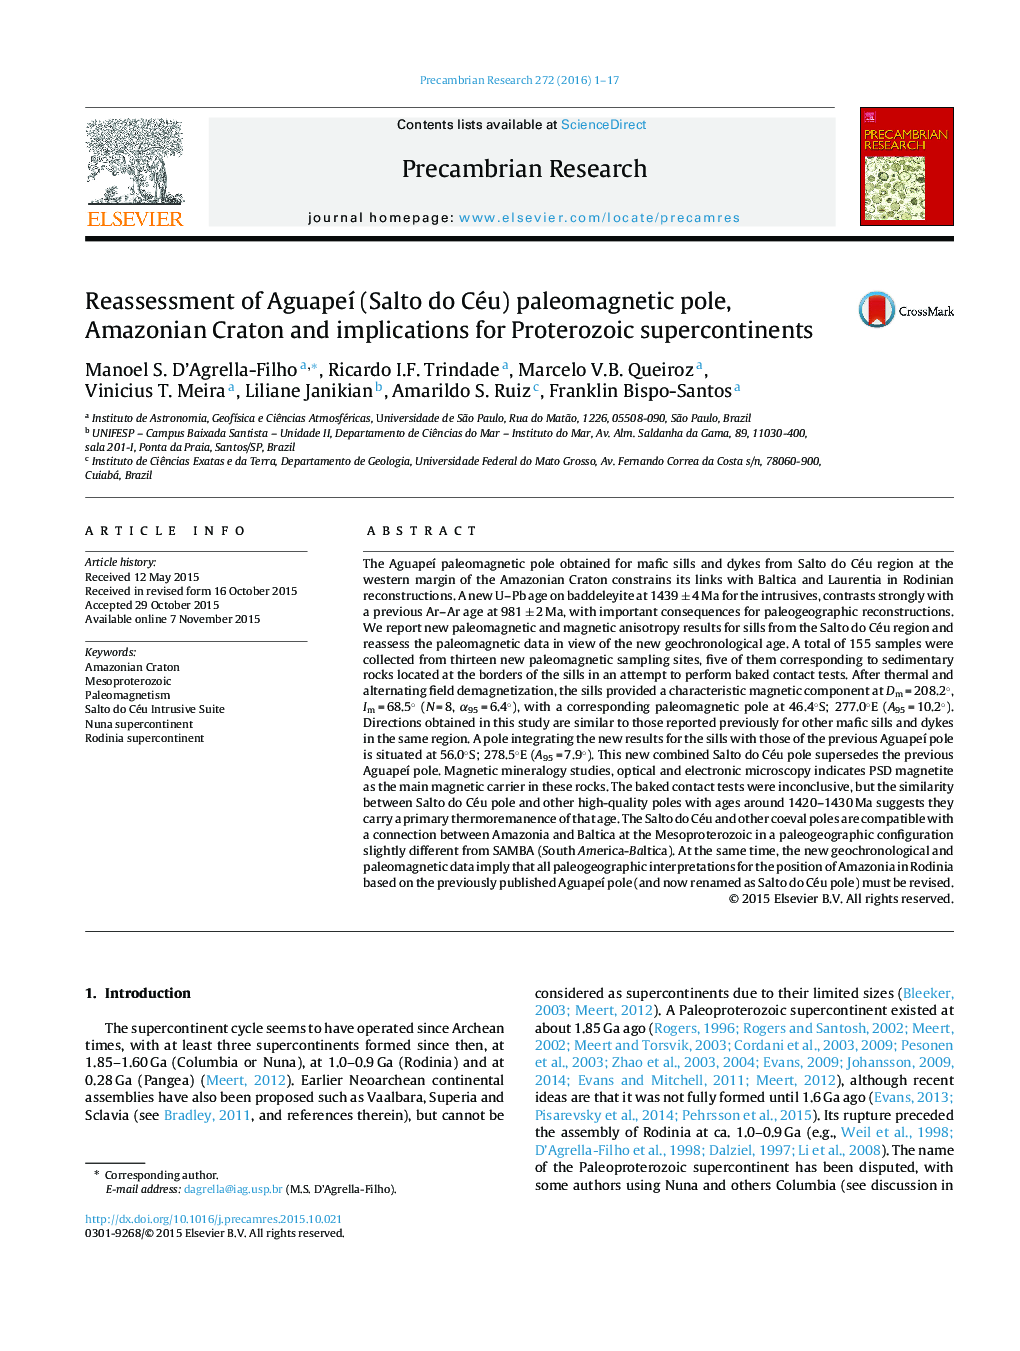 Reassessment of Aguapeí (Salto do Céu) paleomagnetic pole, Amazonian Craton and implications for Proterozoic supercontinents